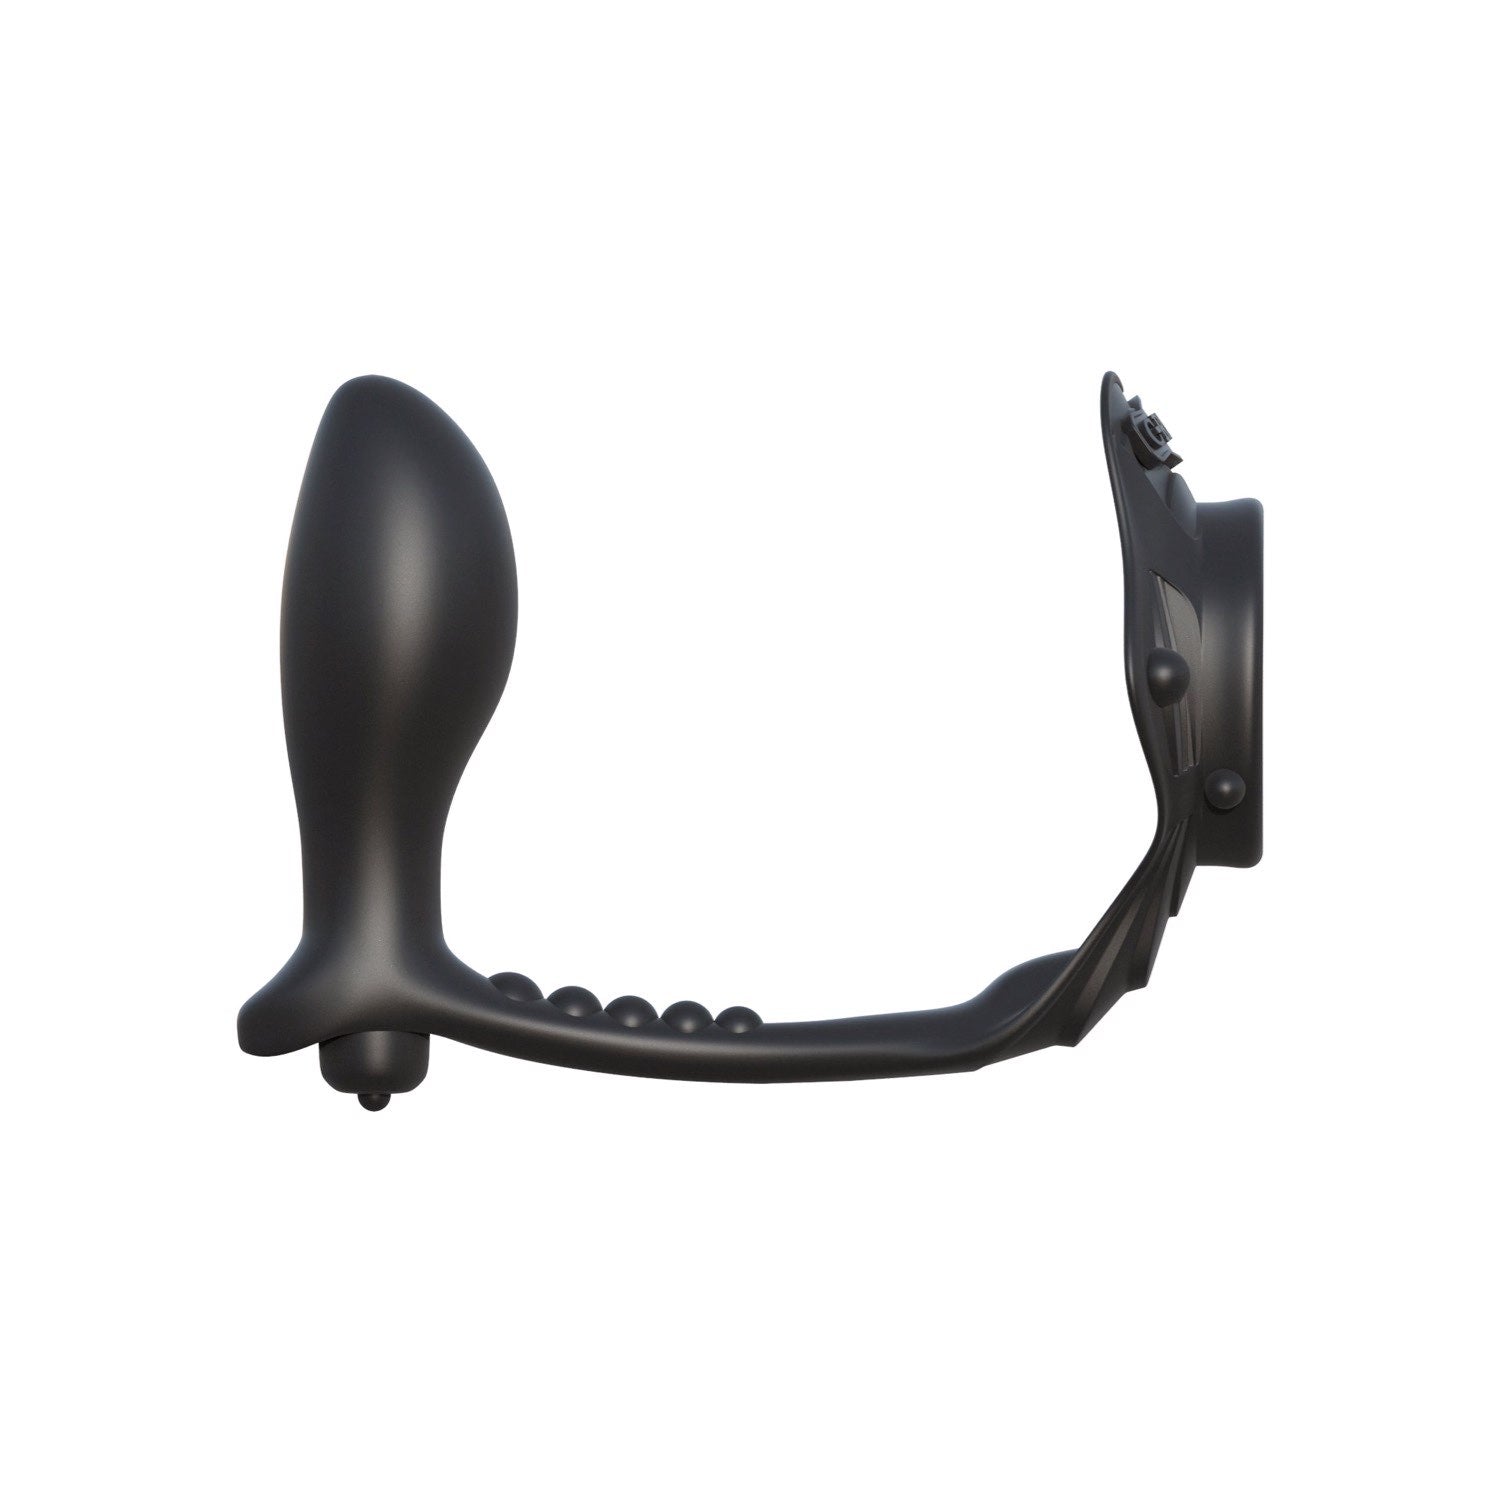 Fantasy C-Ringz Fantasy C-ringz Rock Hard Ass-gasm - Black Cock Ring with Vibrating Anal Plug by Pipedream